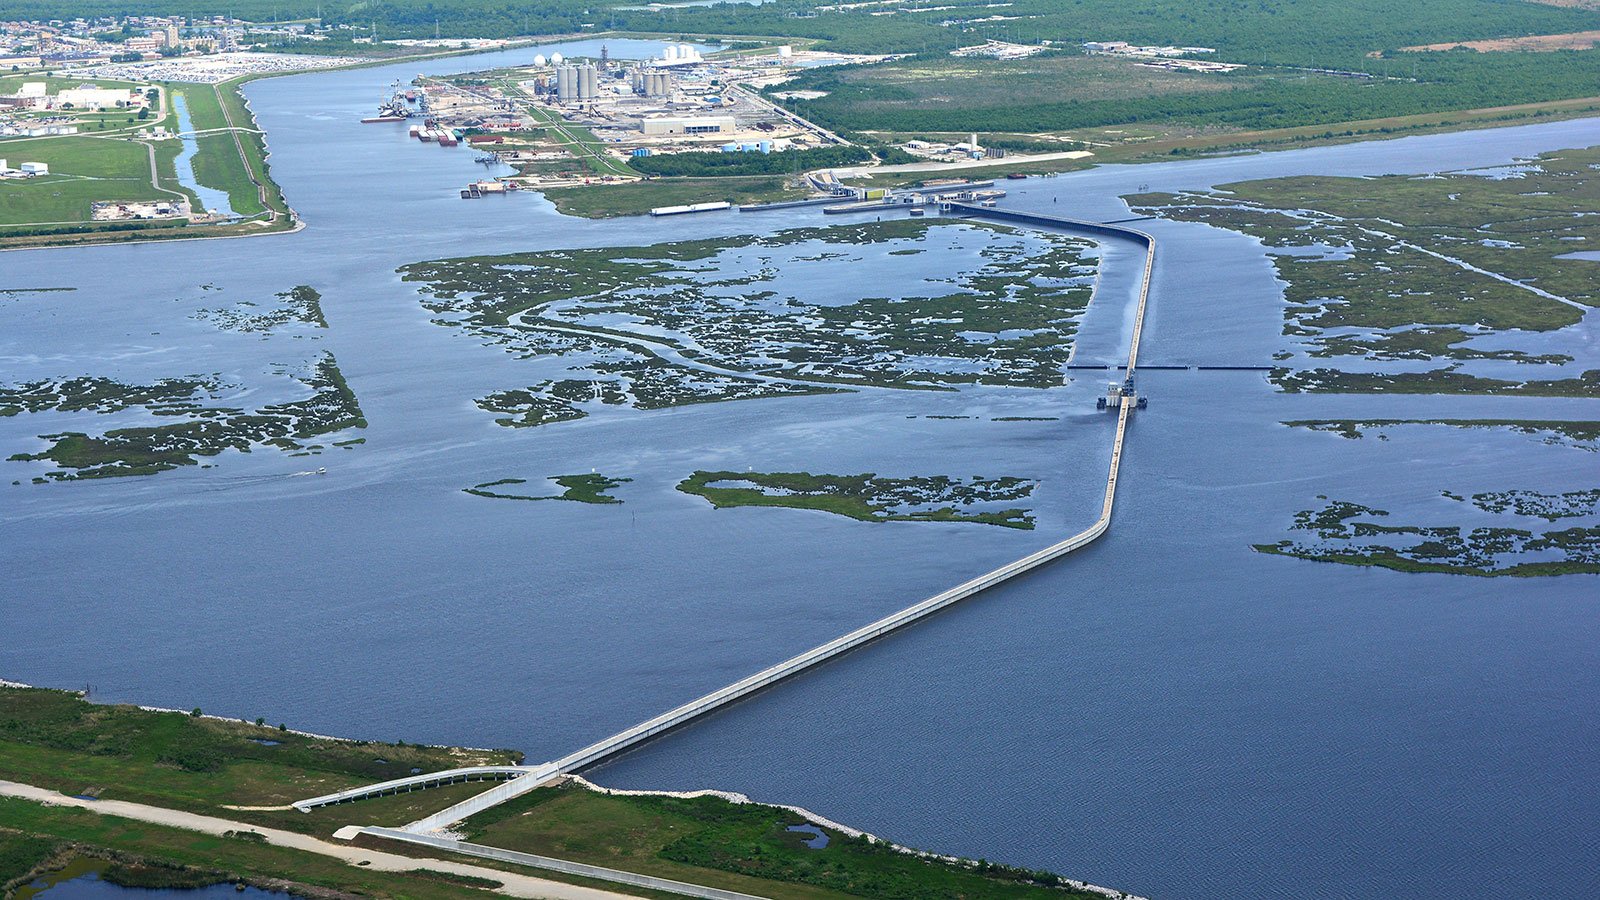 Part of the Inner Harbor Navigation Canal Lake Borgne Surge Barrier